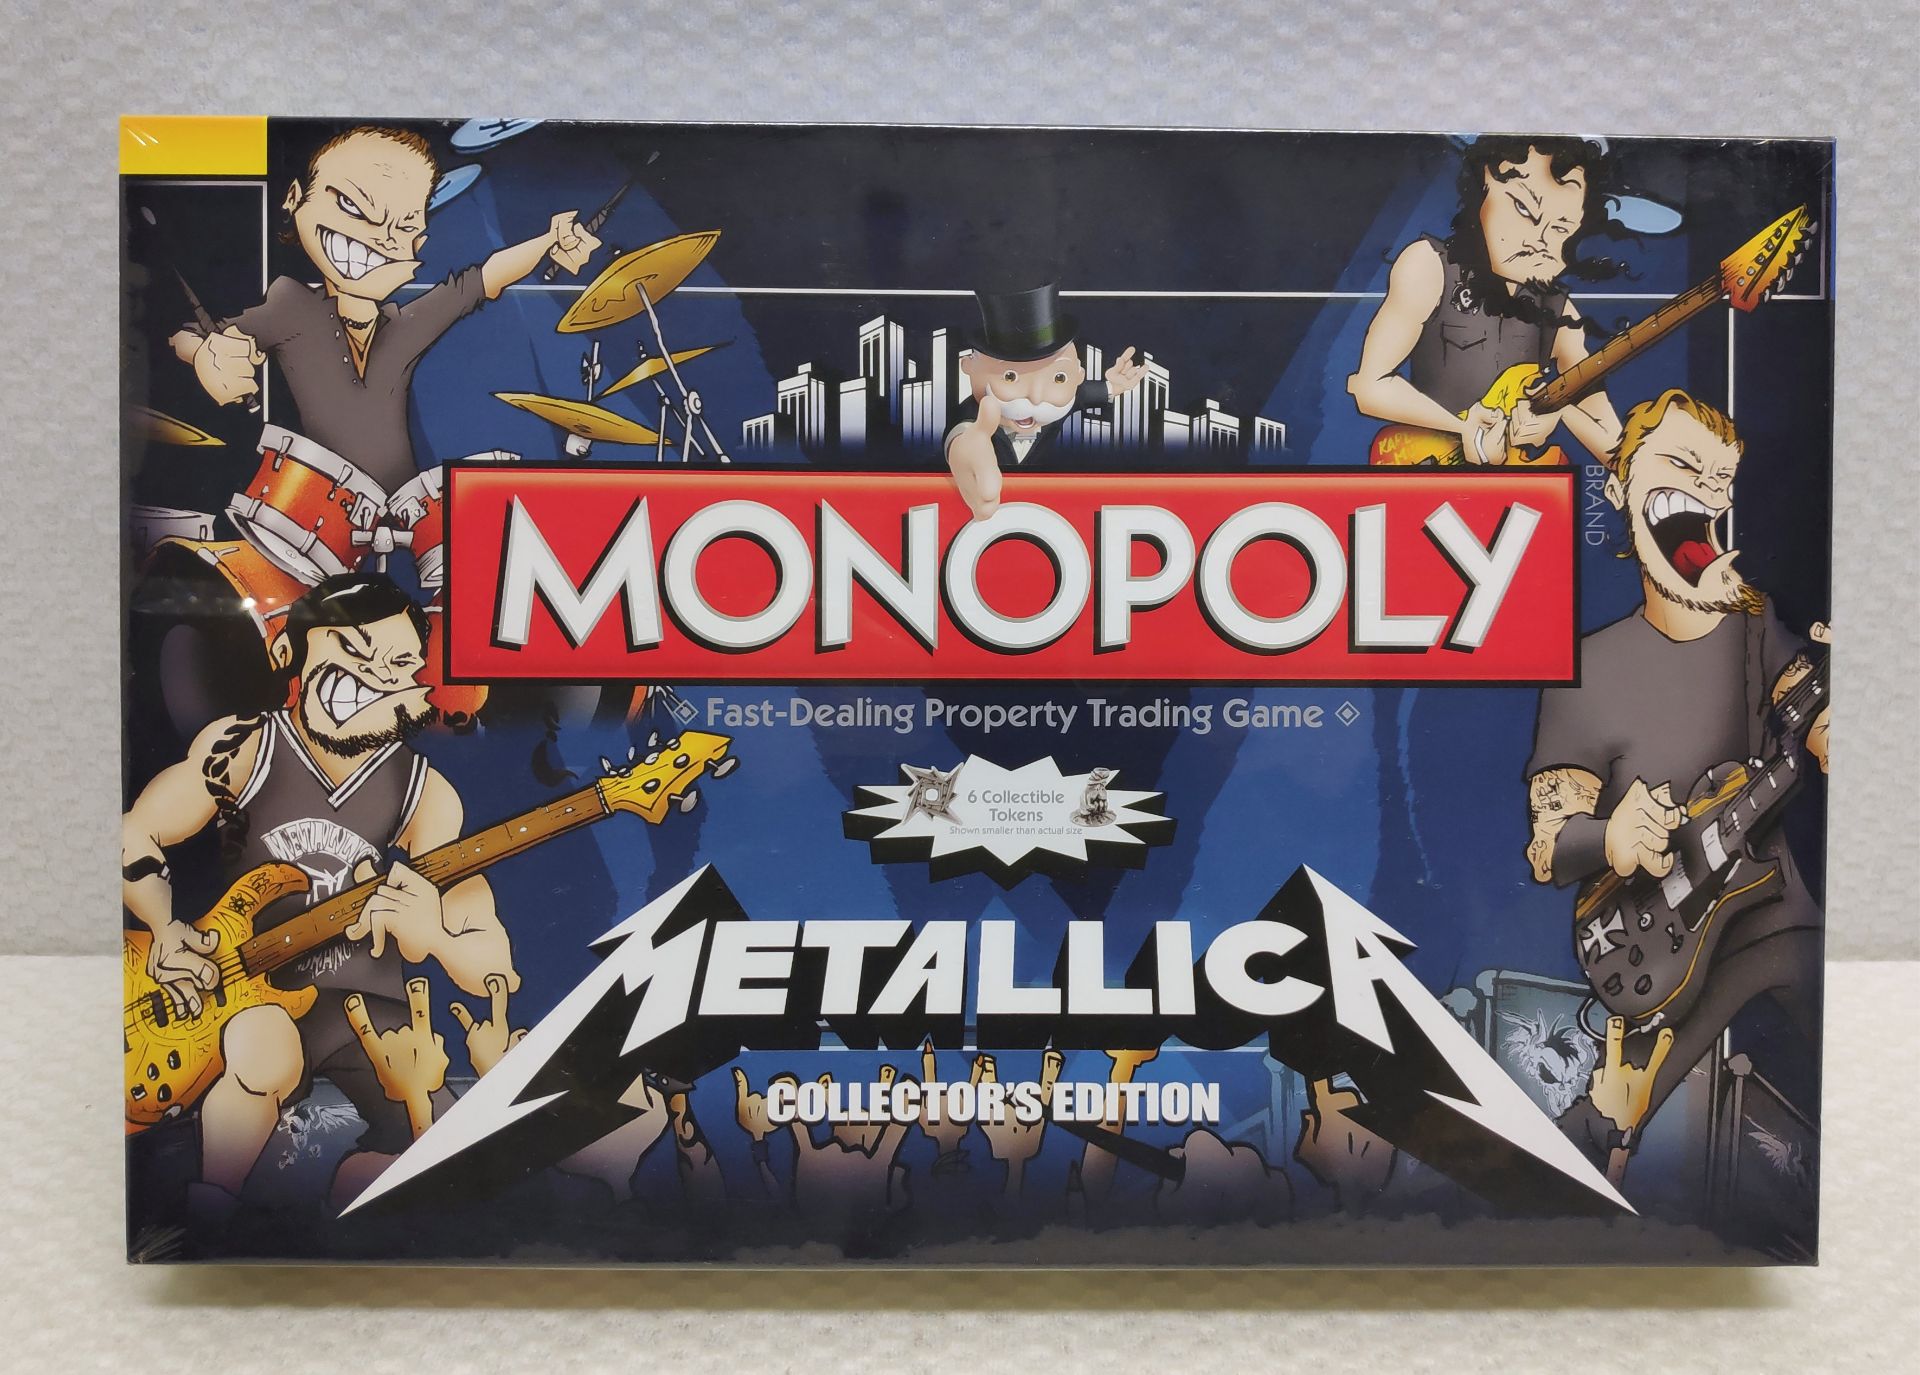 1 x Metallica Collector's Edition Monopoly - New/Sealed - HTYS170 - CL720 - Location: Altrincham WA1